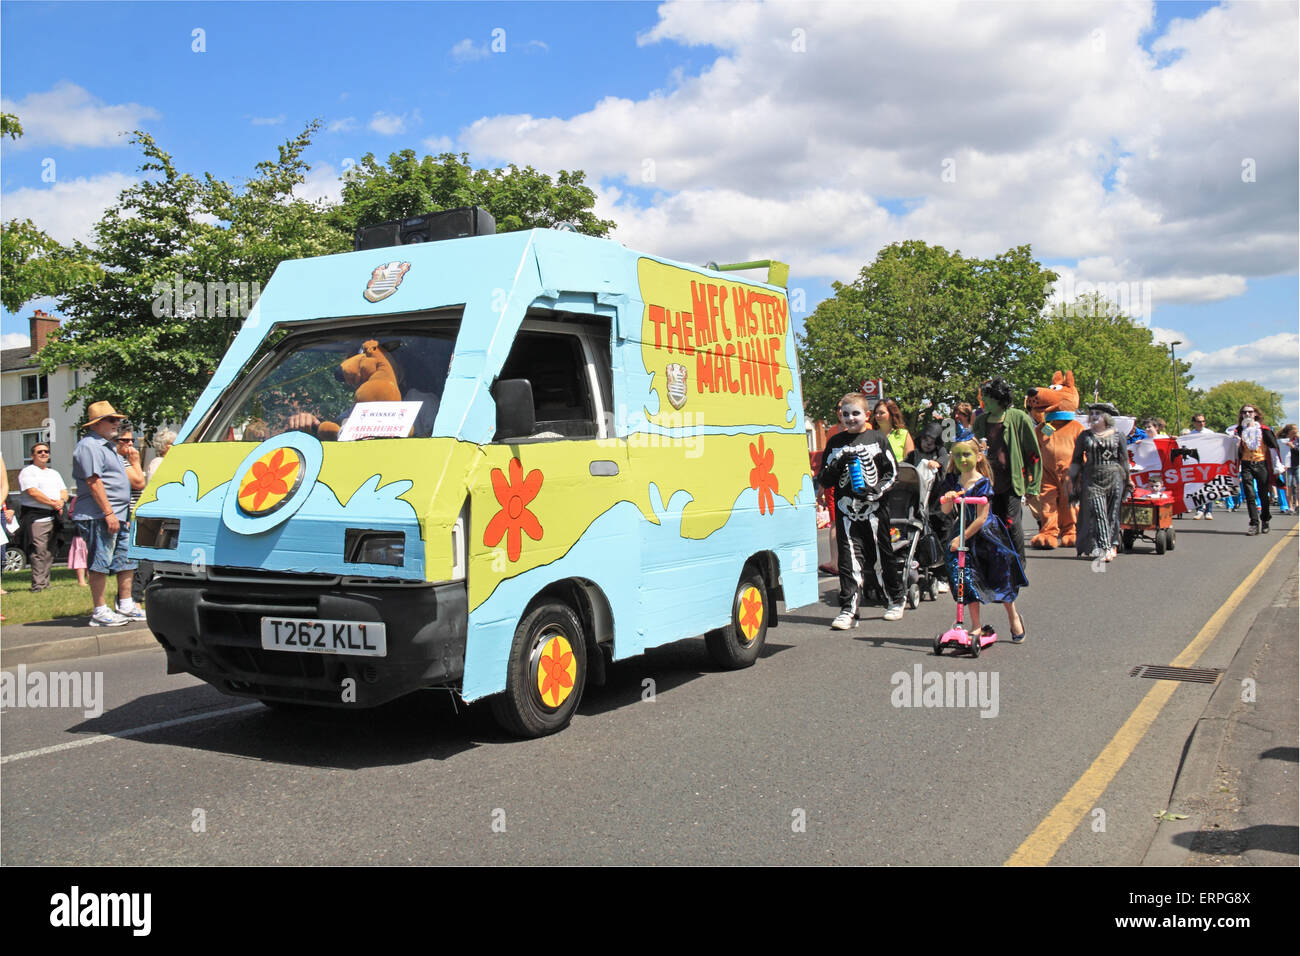 Scooby Doo Mystery Machine by Molesey Football Club, Molesey Carnival Procession. Saturday 6th June 2015. Molesey, Surrey, England, UK. Annual procession of themed floats followed by village fair always held on first Saturday of June. Stock Photo